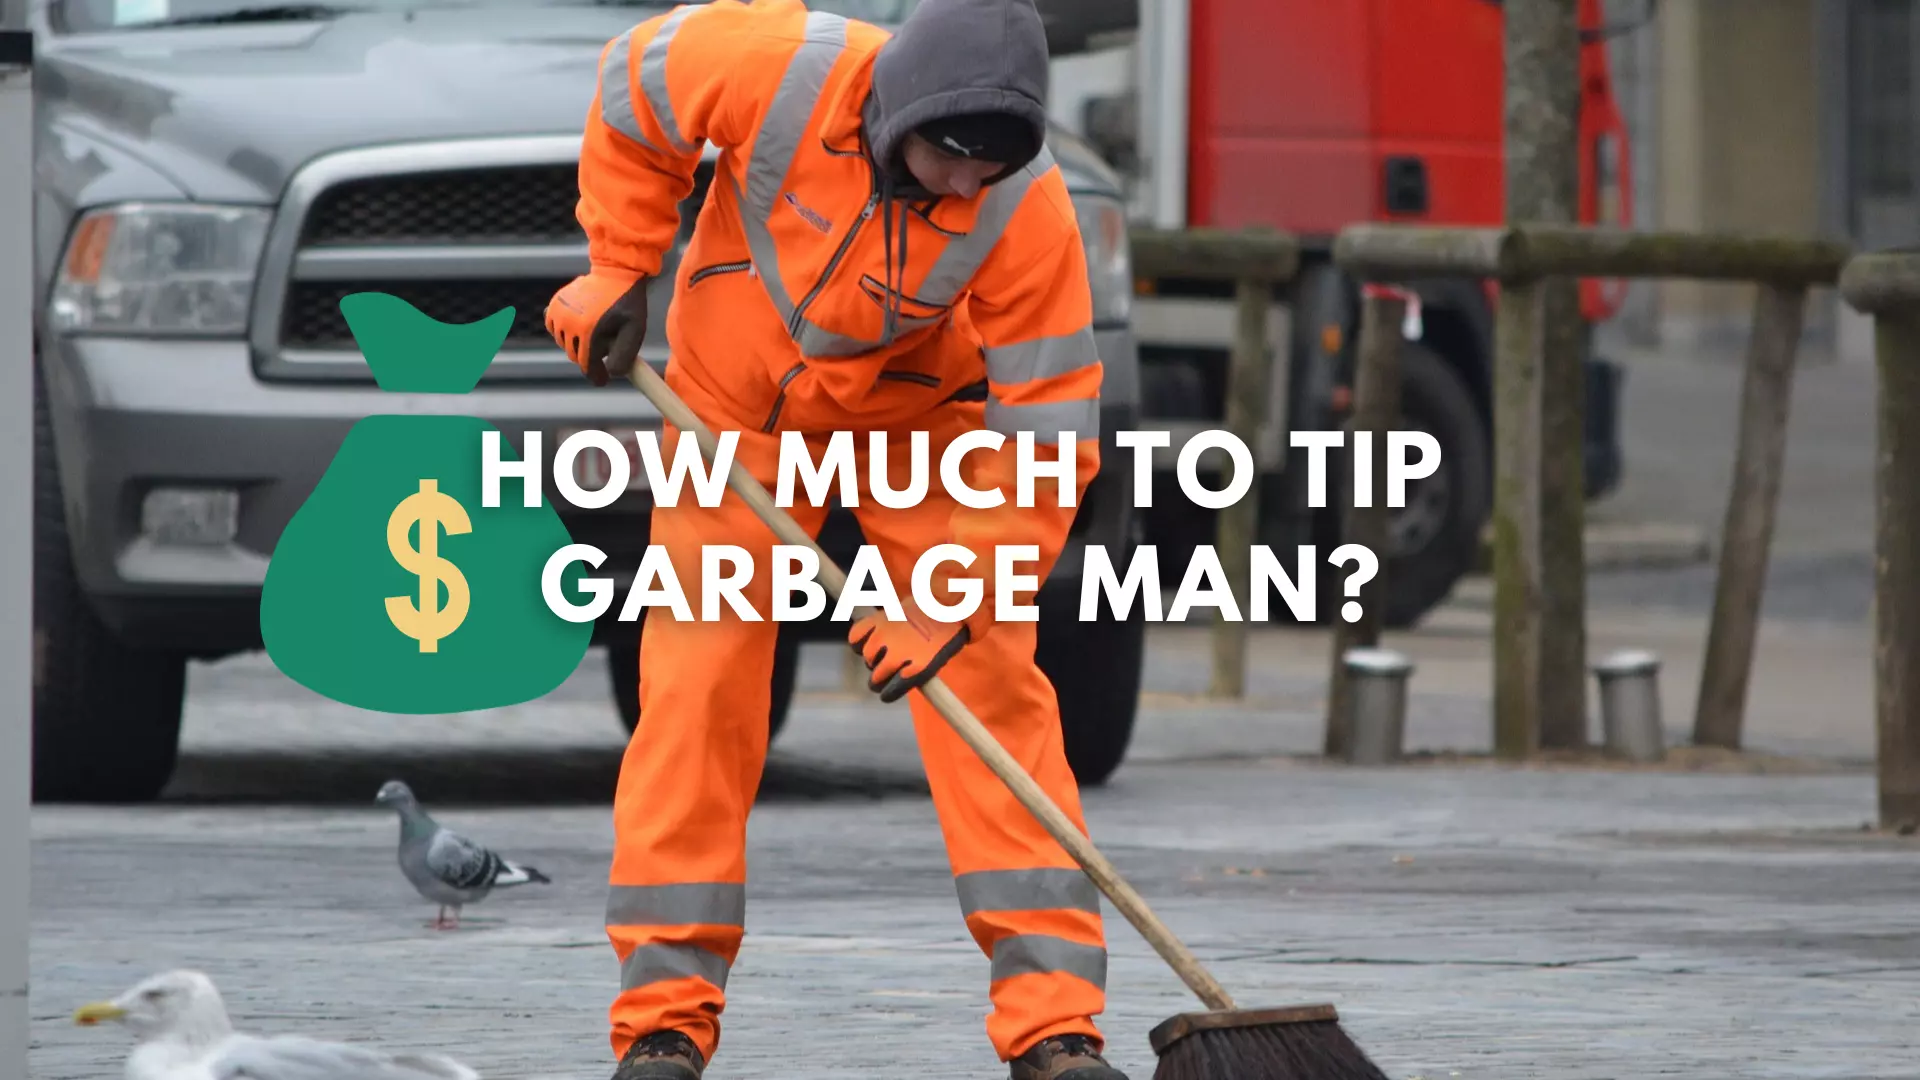 How Much to Tip Garbage Man?